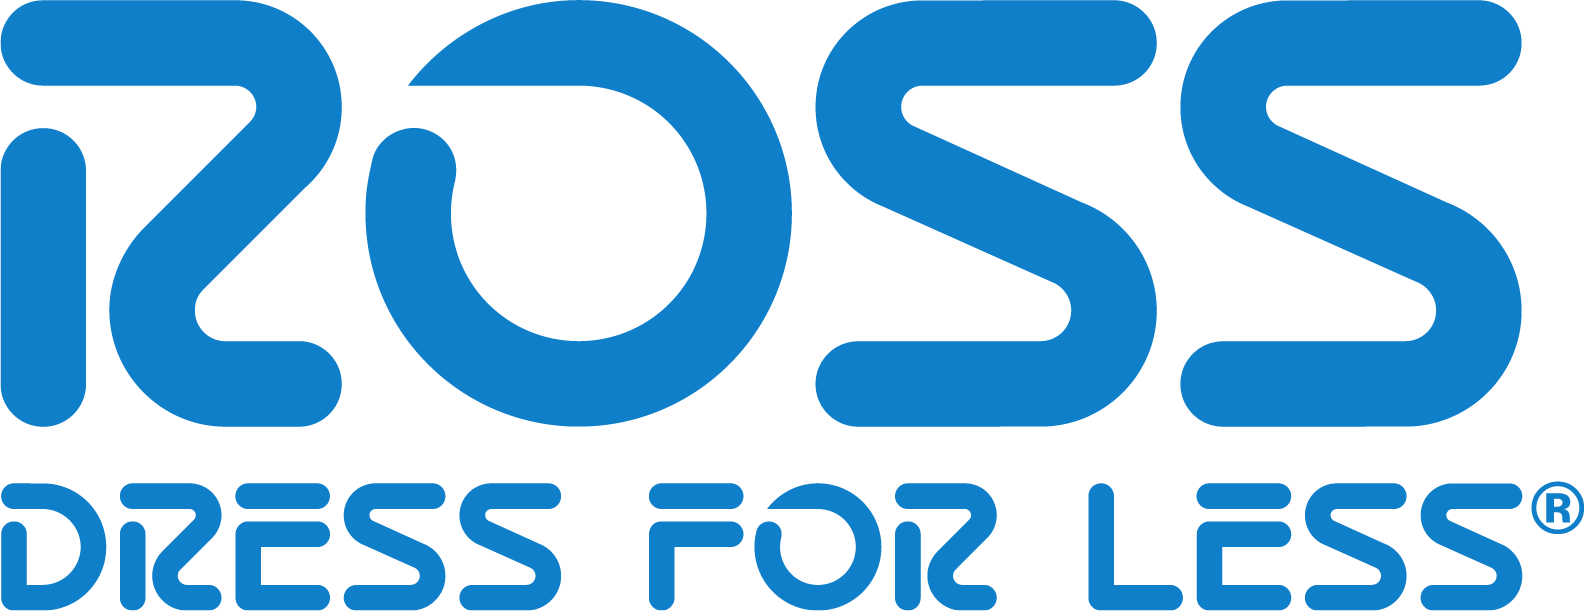 Ross Stores Logo png